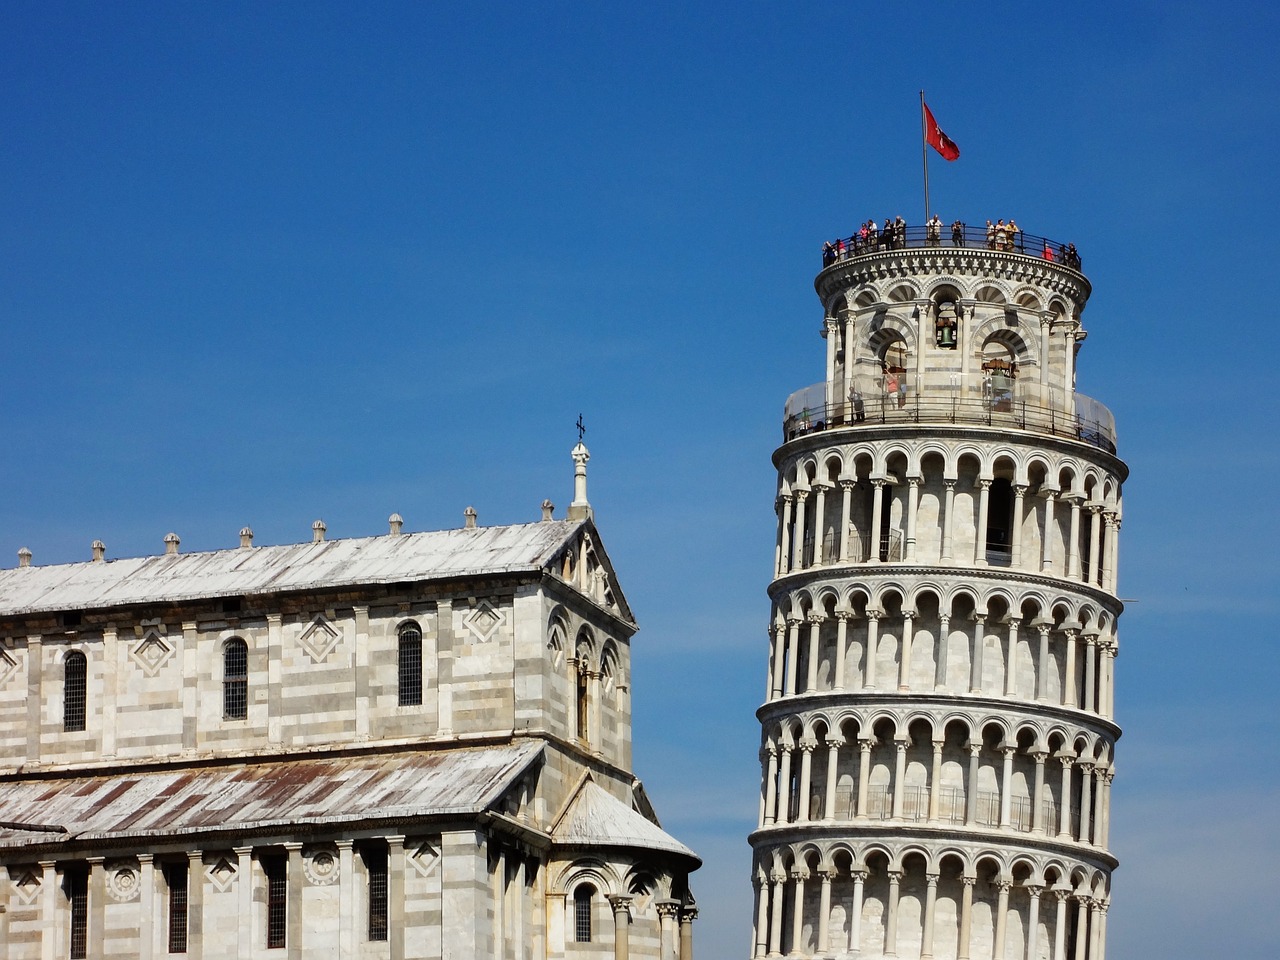 visit the Leaning Tower of Pisa for free